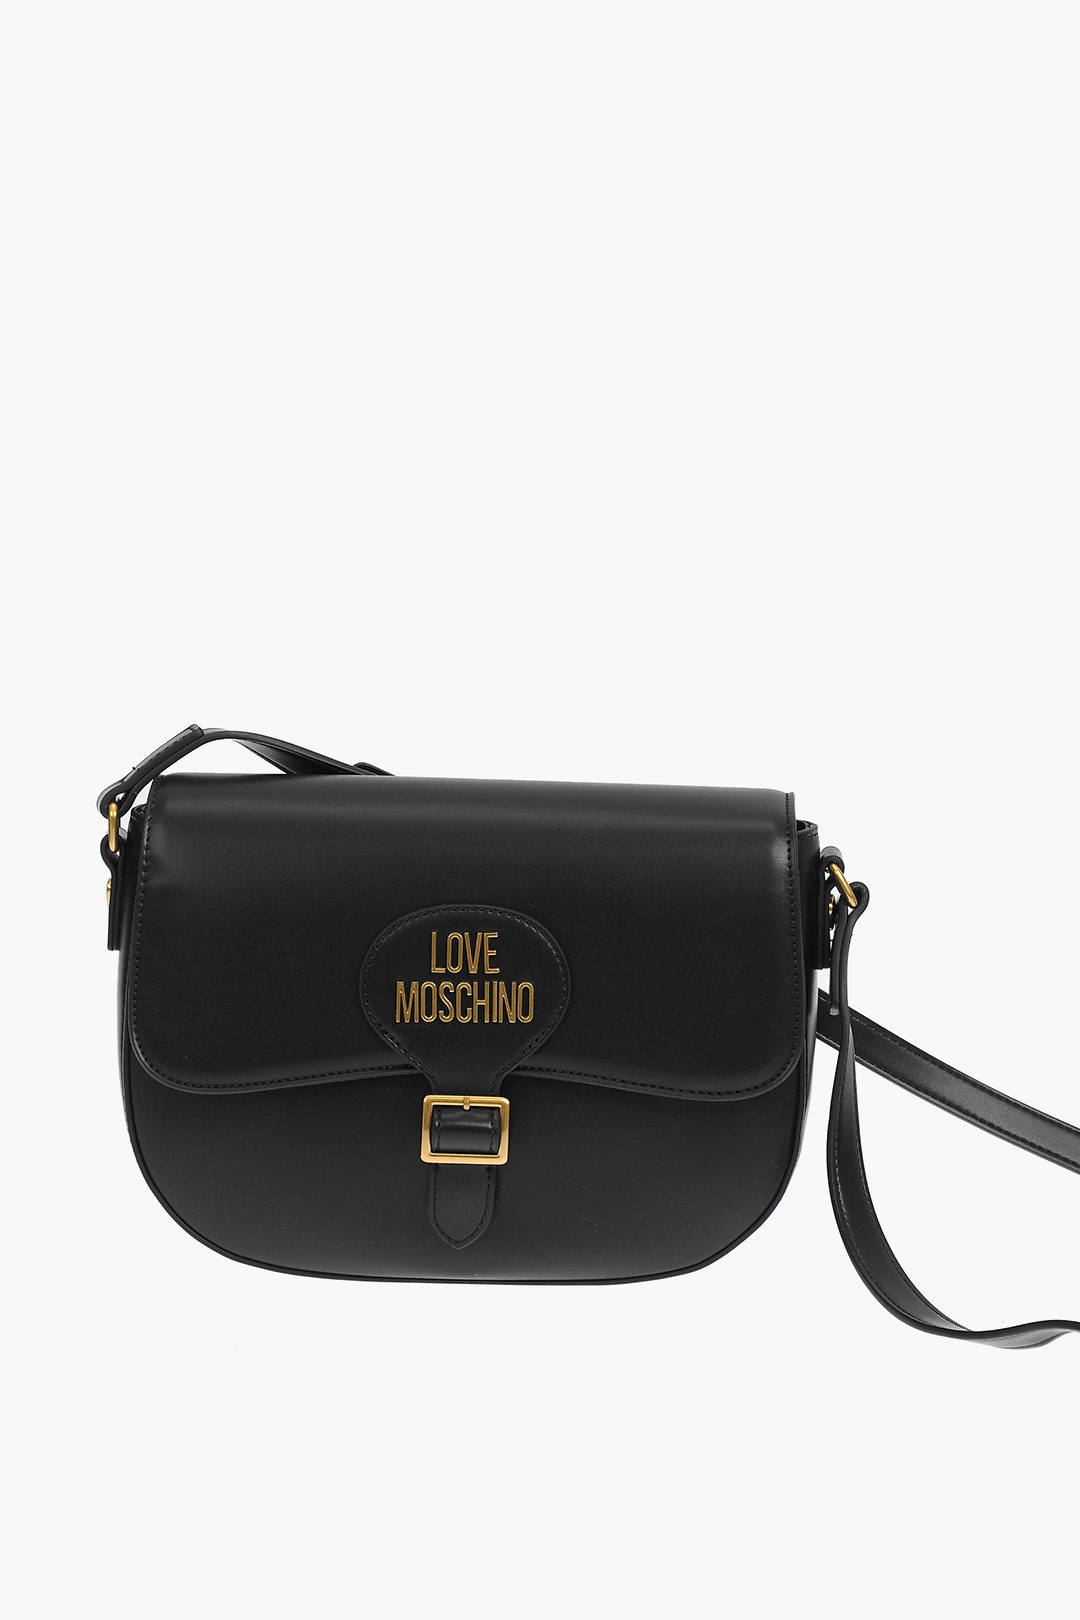 Moschino Shoulder & Crossbody bags for Women - Official Store